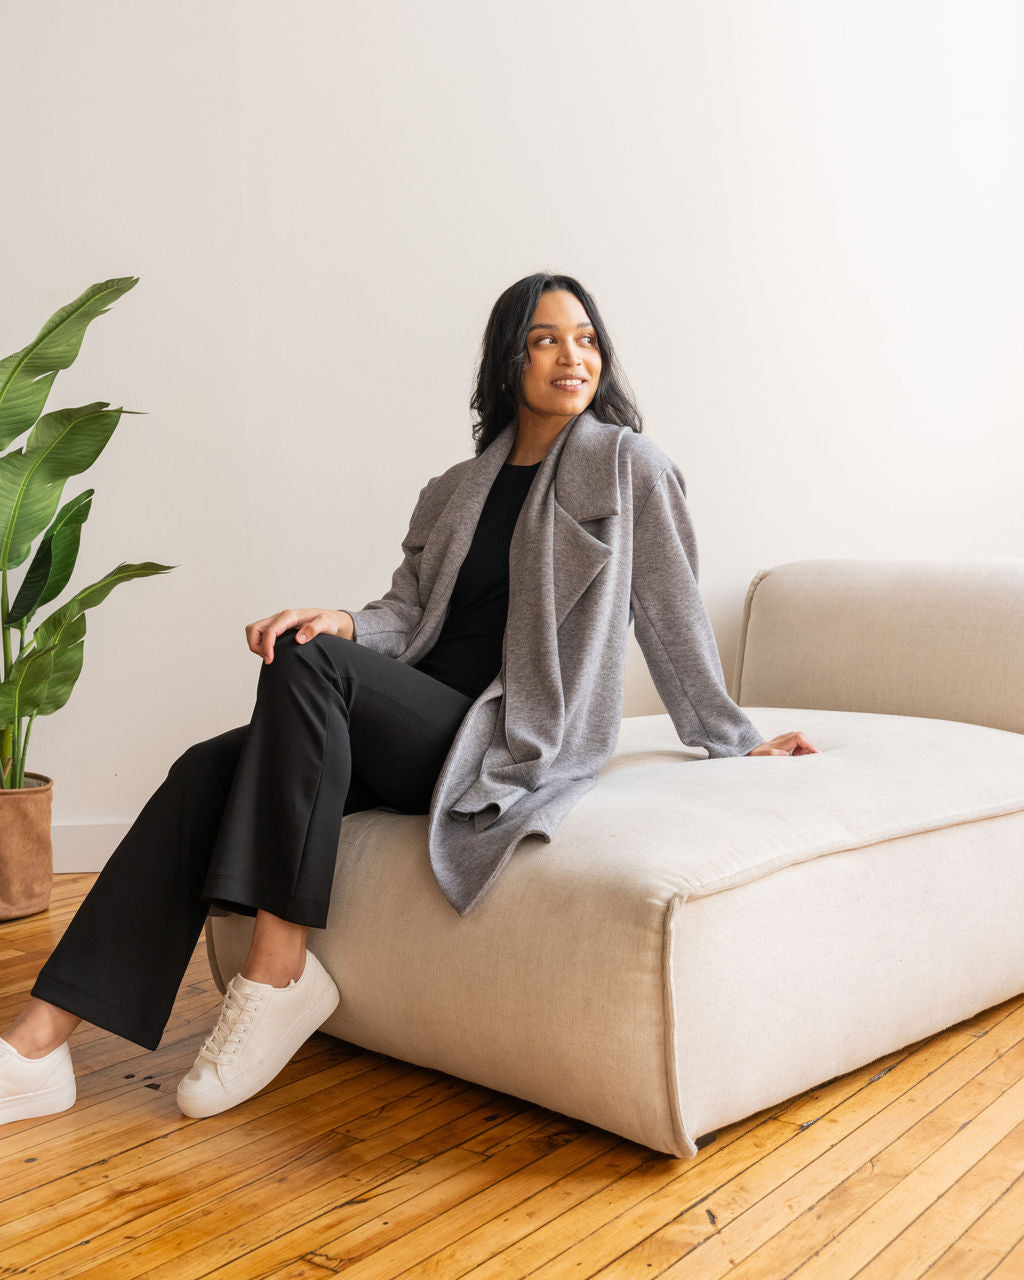 Canadian Ethical Clothing Boutiques: 5 Brands You Need to Know - Toast Life